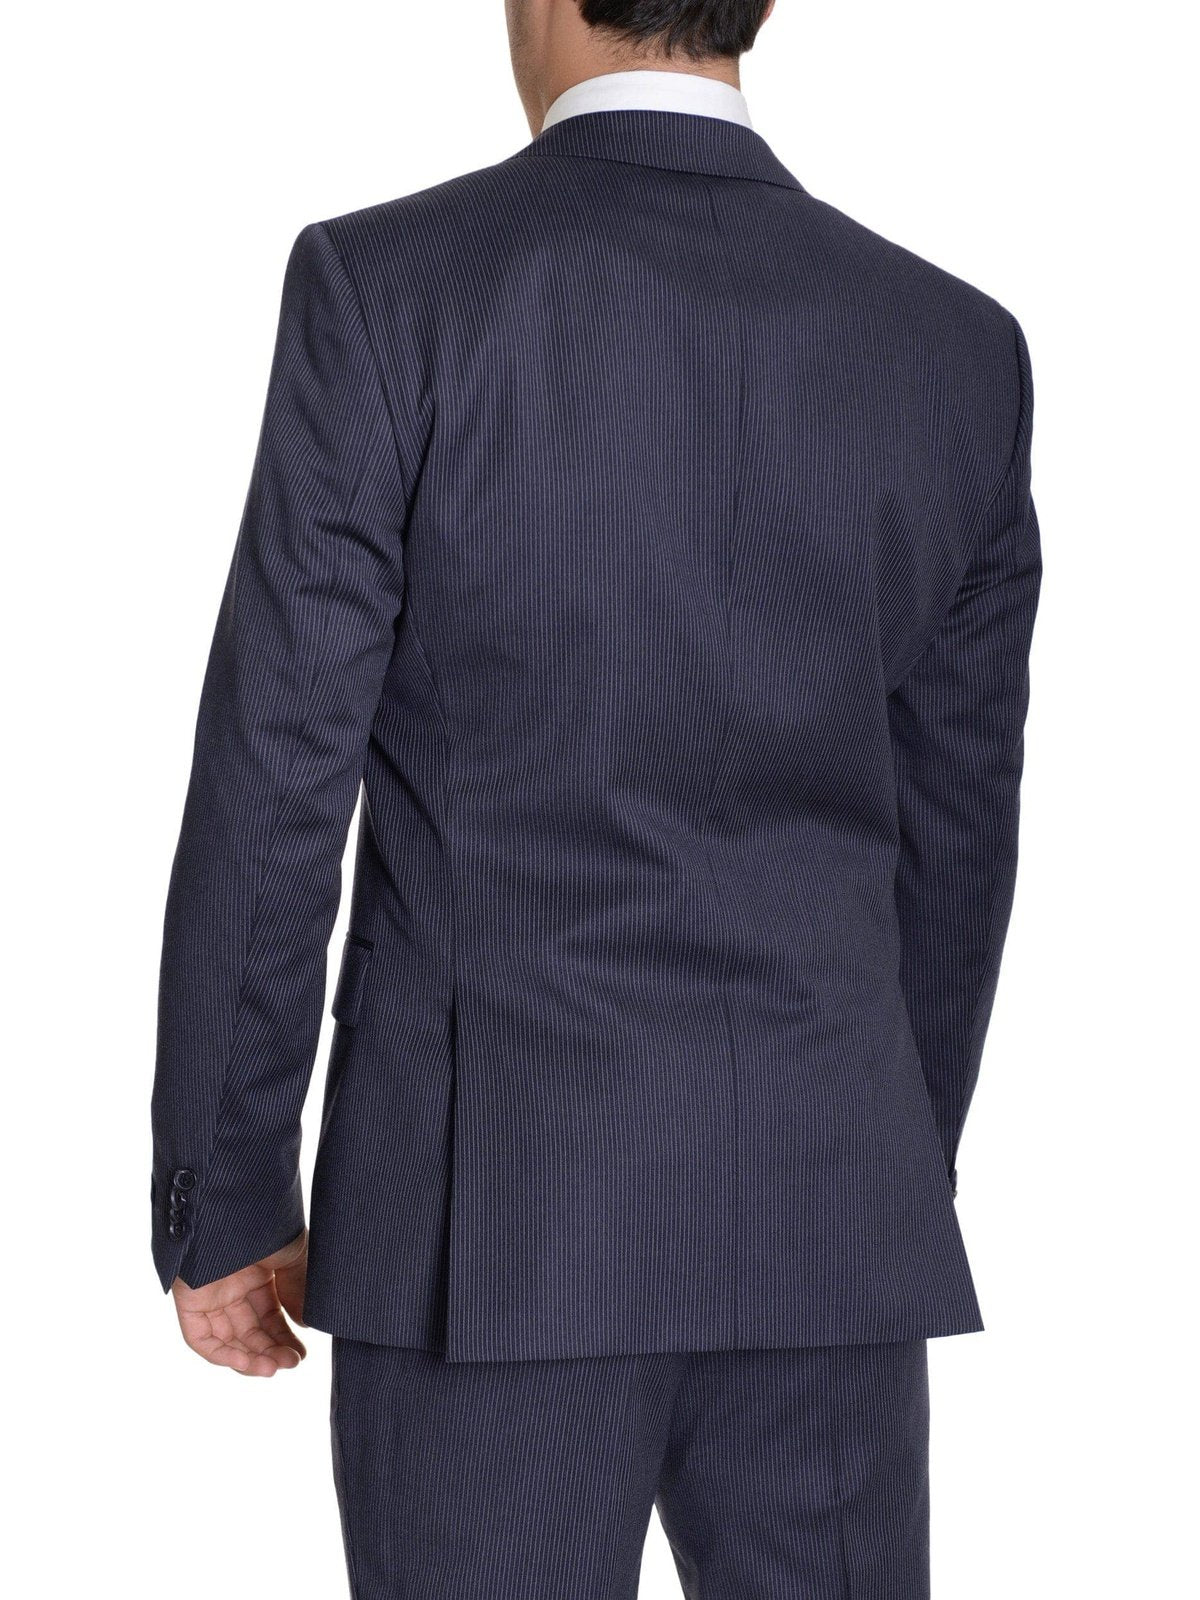 HUGO BOSS Sale Suits Hugo Boss Paolini1/movio1 Classic Fit Blue Pinstriped Two Button Wool Suit